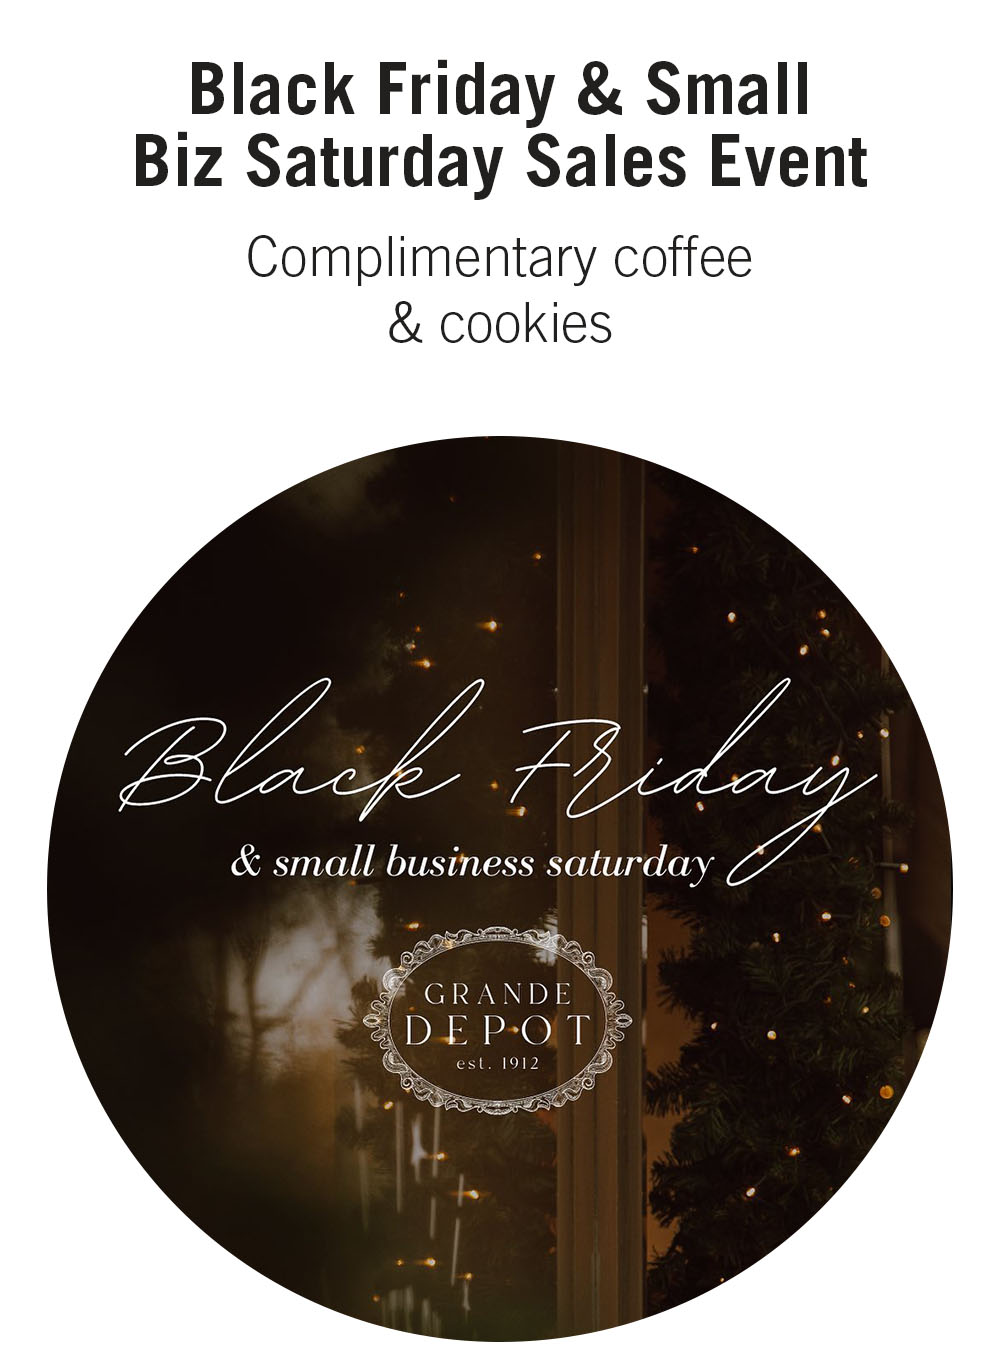 Black Friday & Small Biz Saturday Sales Event Complimentary coffee & cookies